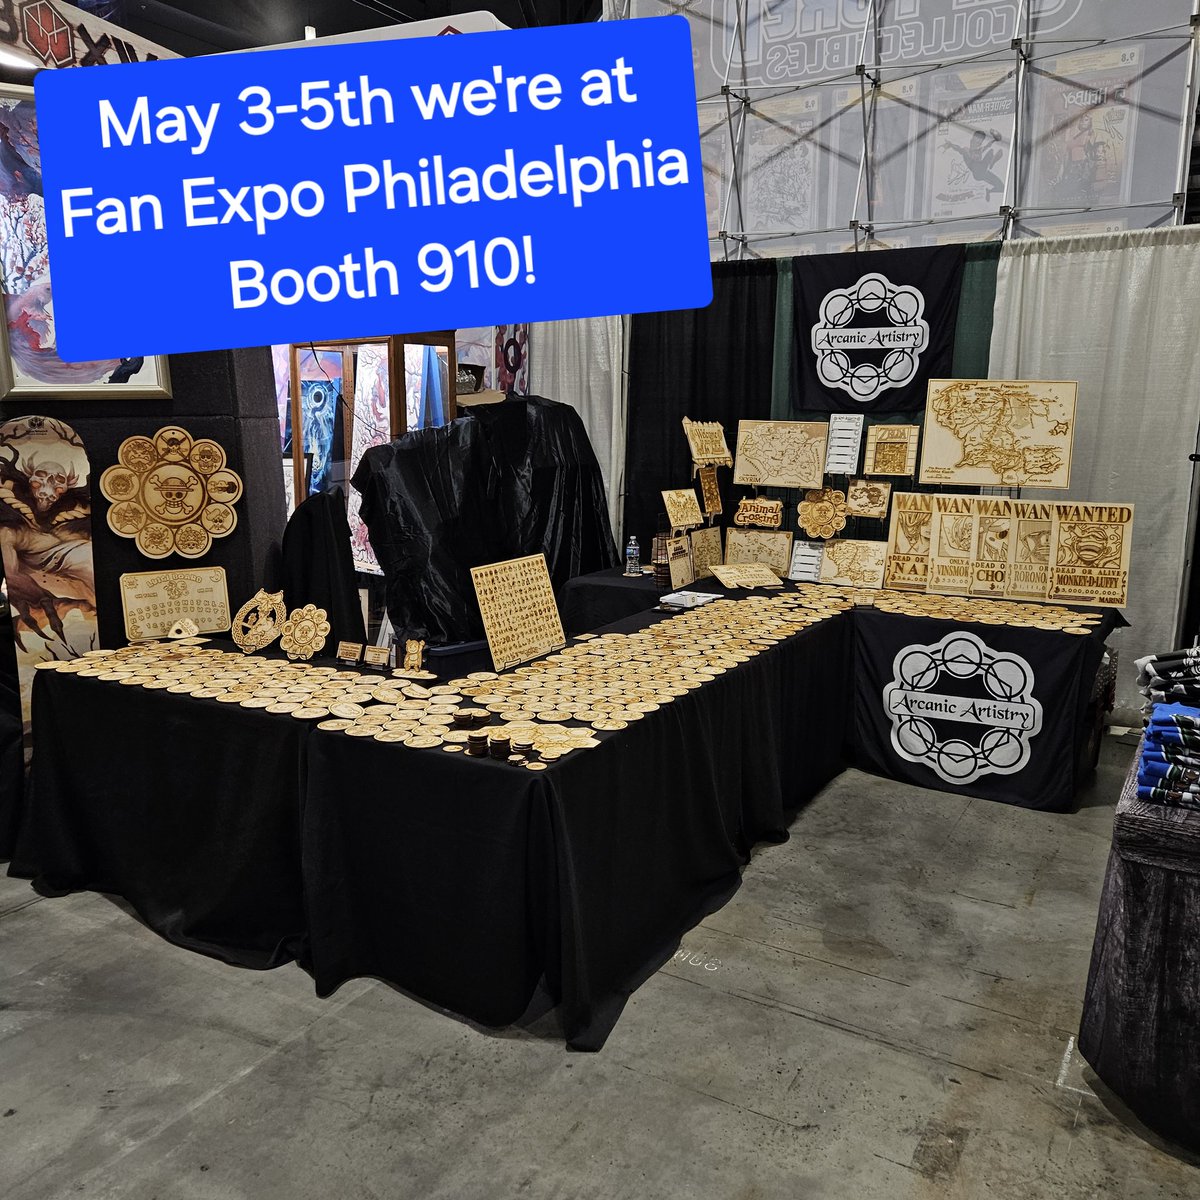 This weekend we're vending at Fan Expo Philadelphia! Be sure to come by our booth 910 to pick up a few coasters. #fanexpo #fanexpophiladelphia #animecon #artistalley #convention